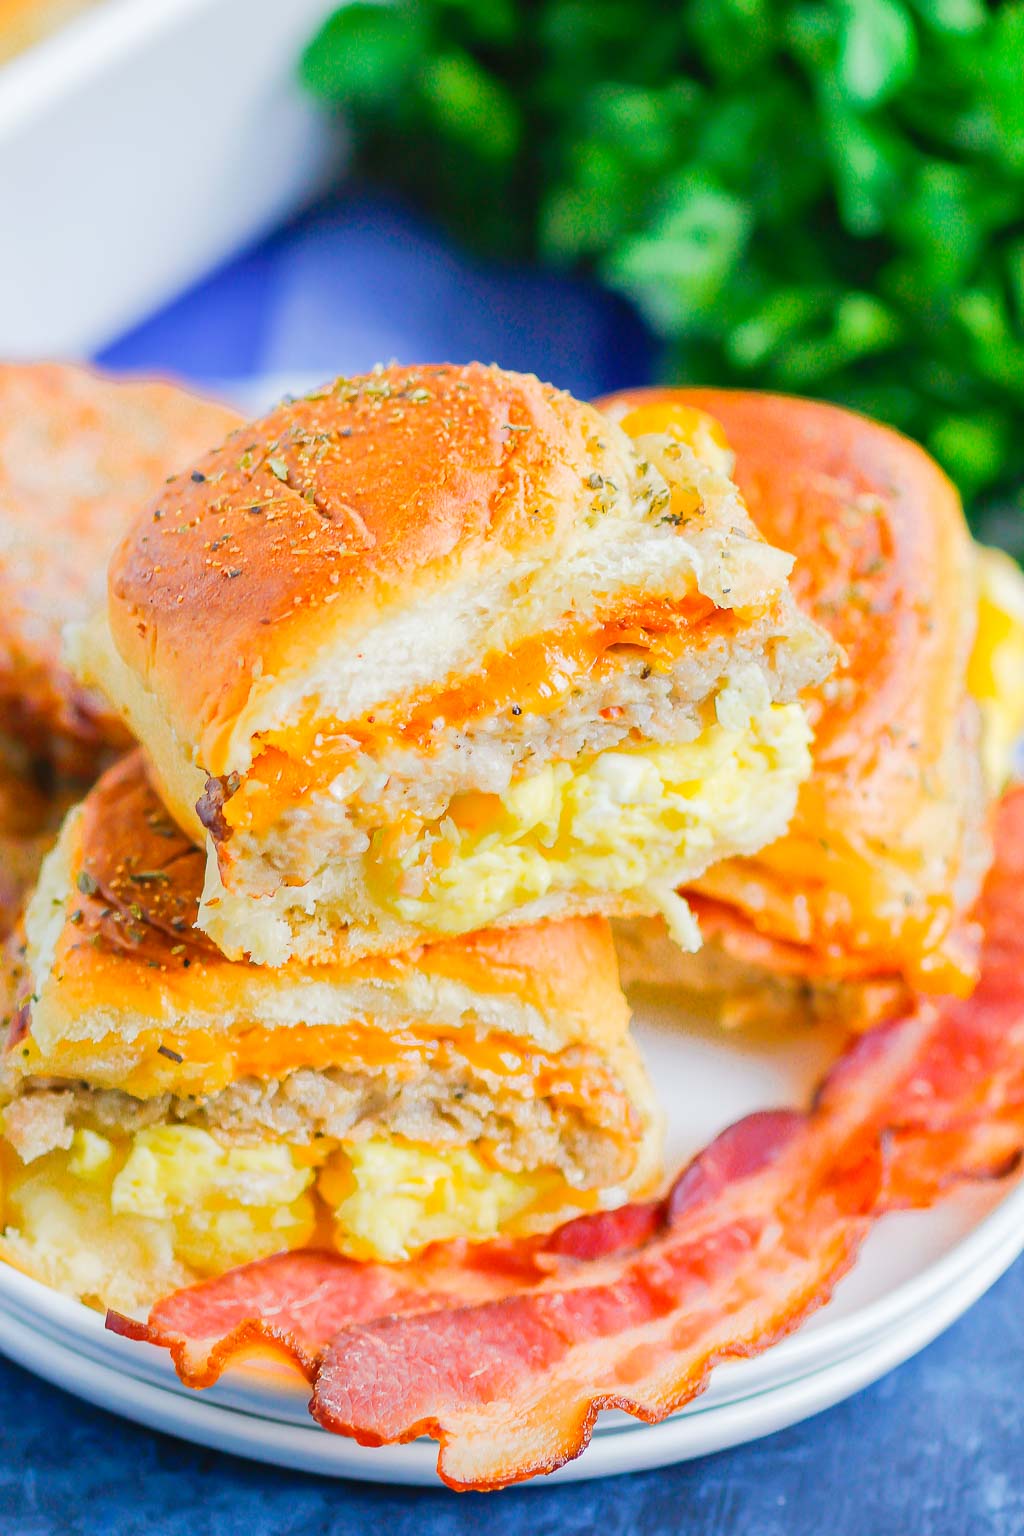 Breakfast Sliders are an easy, make-ahead dish that's filled with your favorite ingredients. Scrambled eggs, crispy bacon, sausage and cheese are loaded into a slider roll and then topped with a garlic butter glaze. Perfect to serve for a crowd or for when you need breakfast on-the-go!